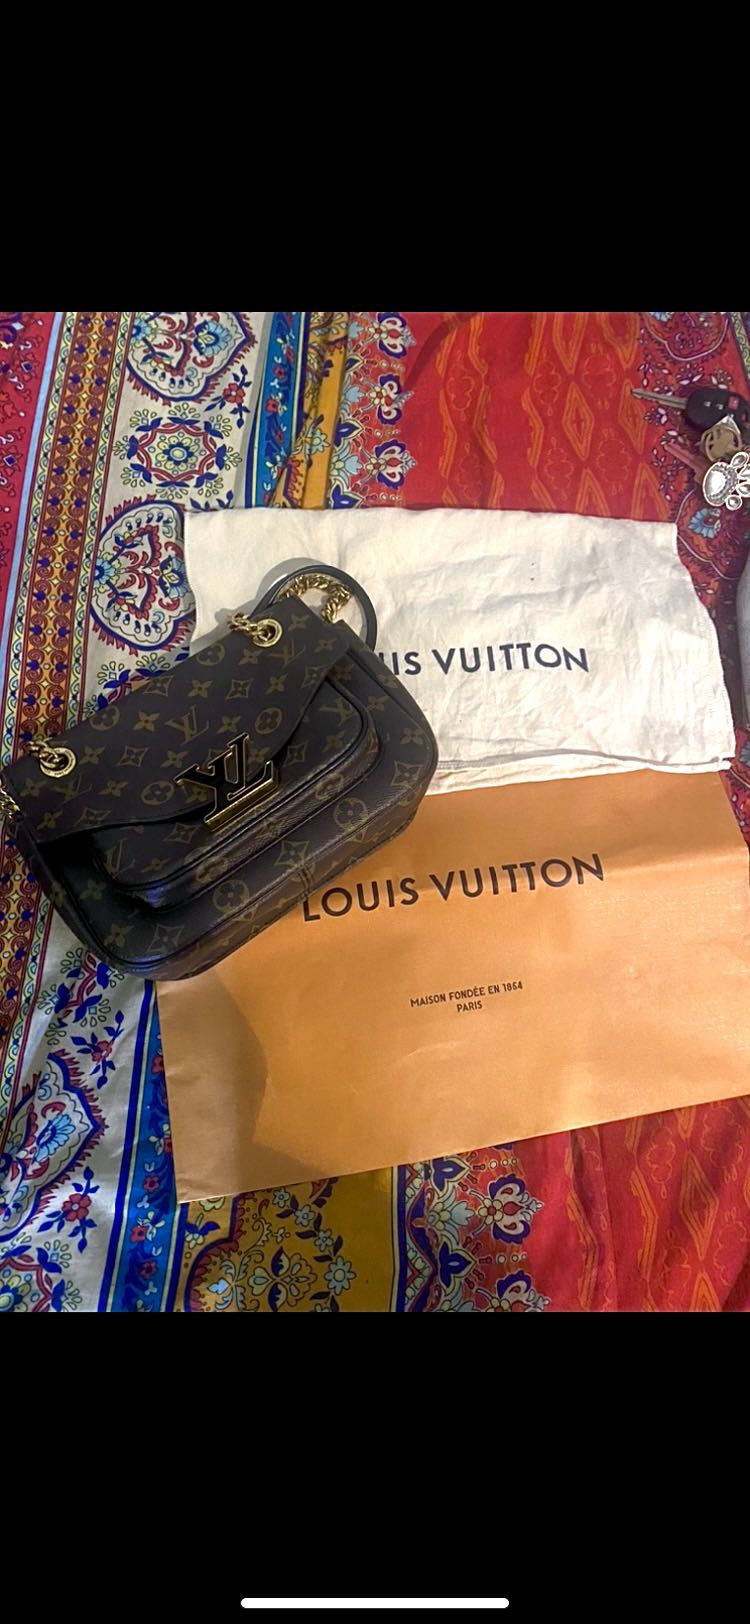 Louis vuitton well loved passy - 1